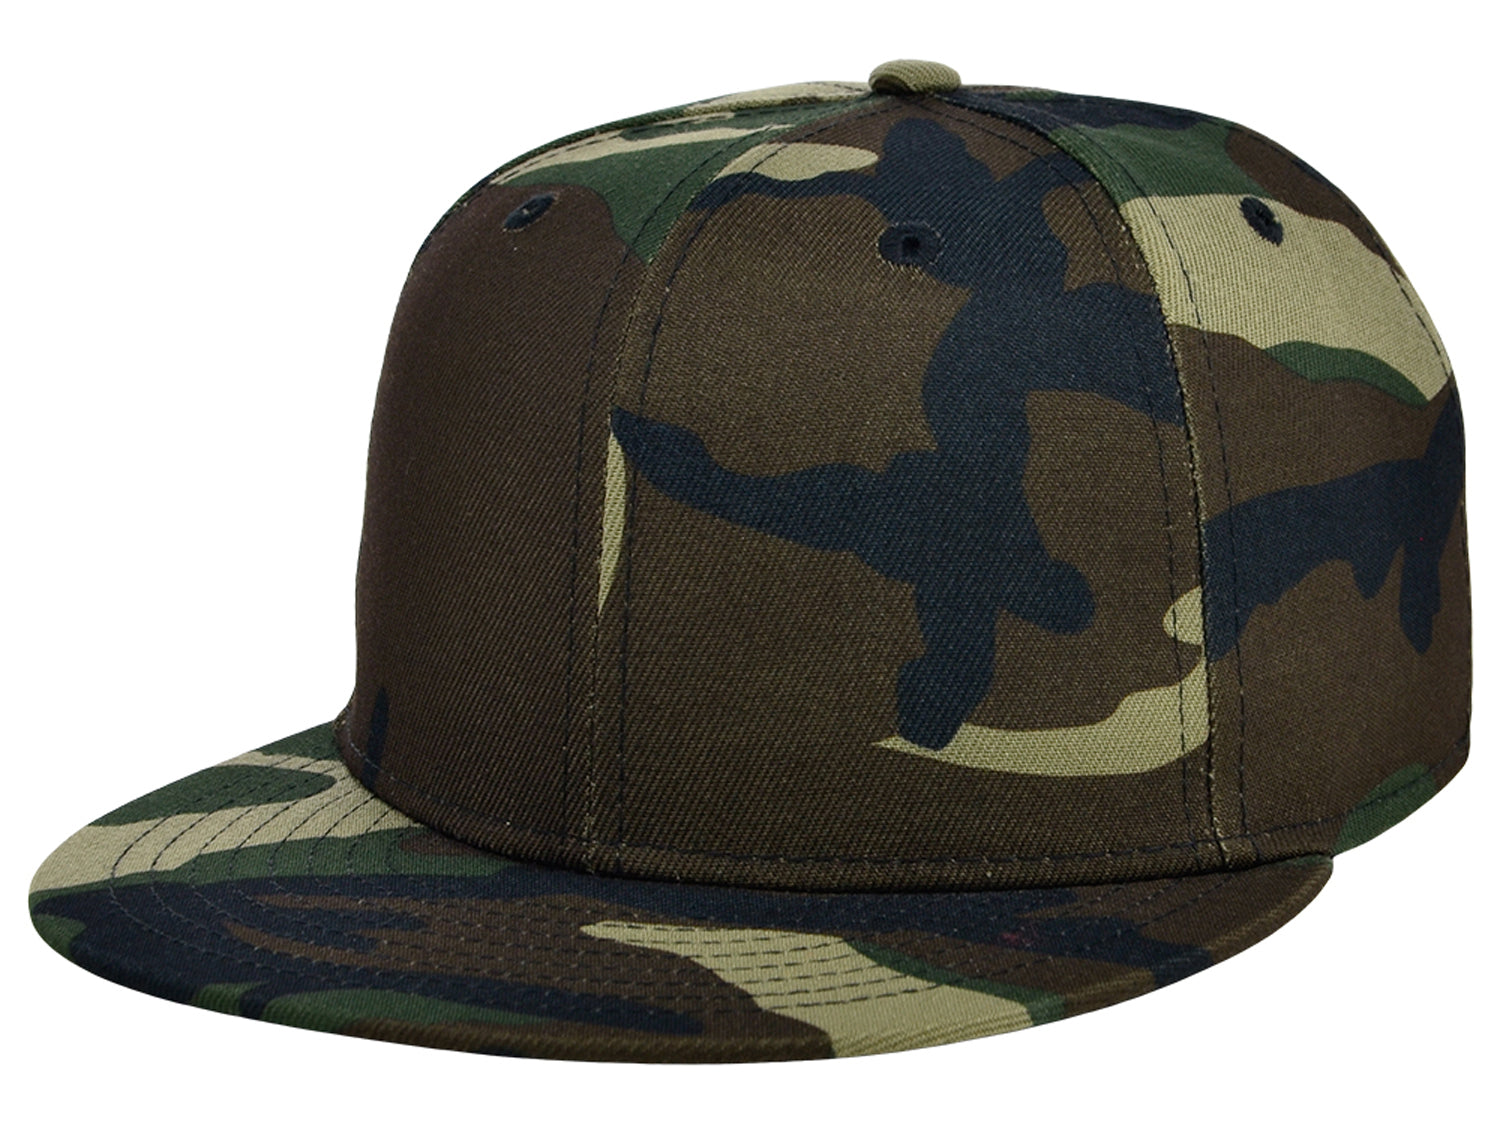 Crowns by Lids Full CourtFitted Cap - Camo 738